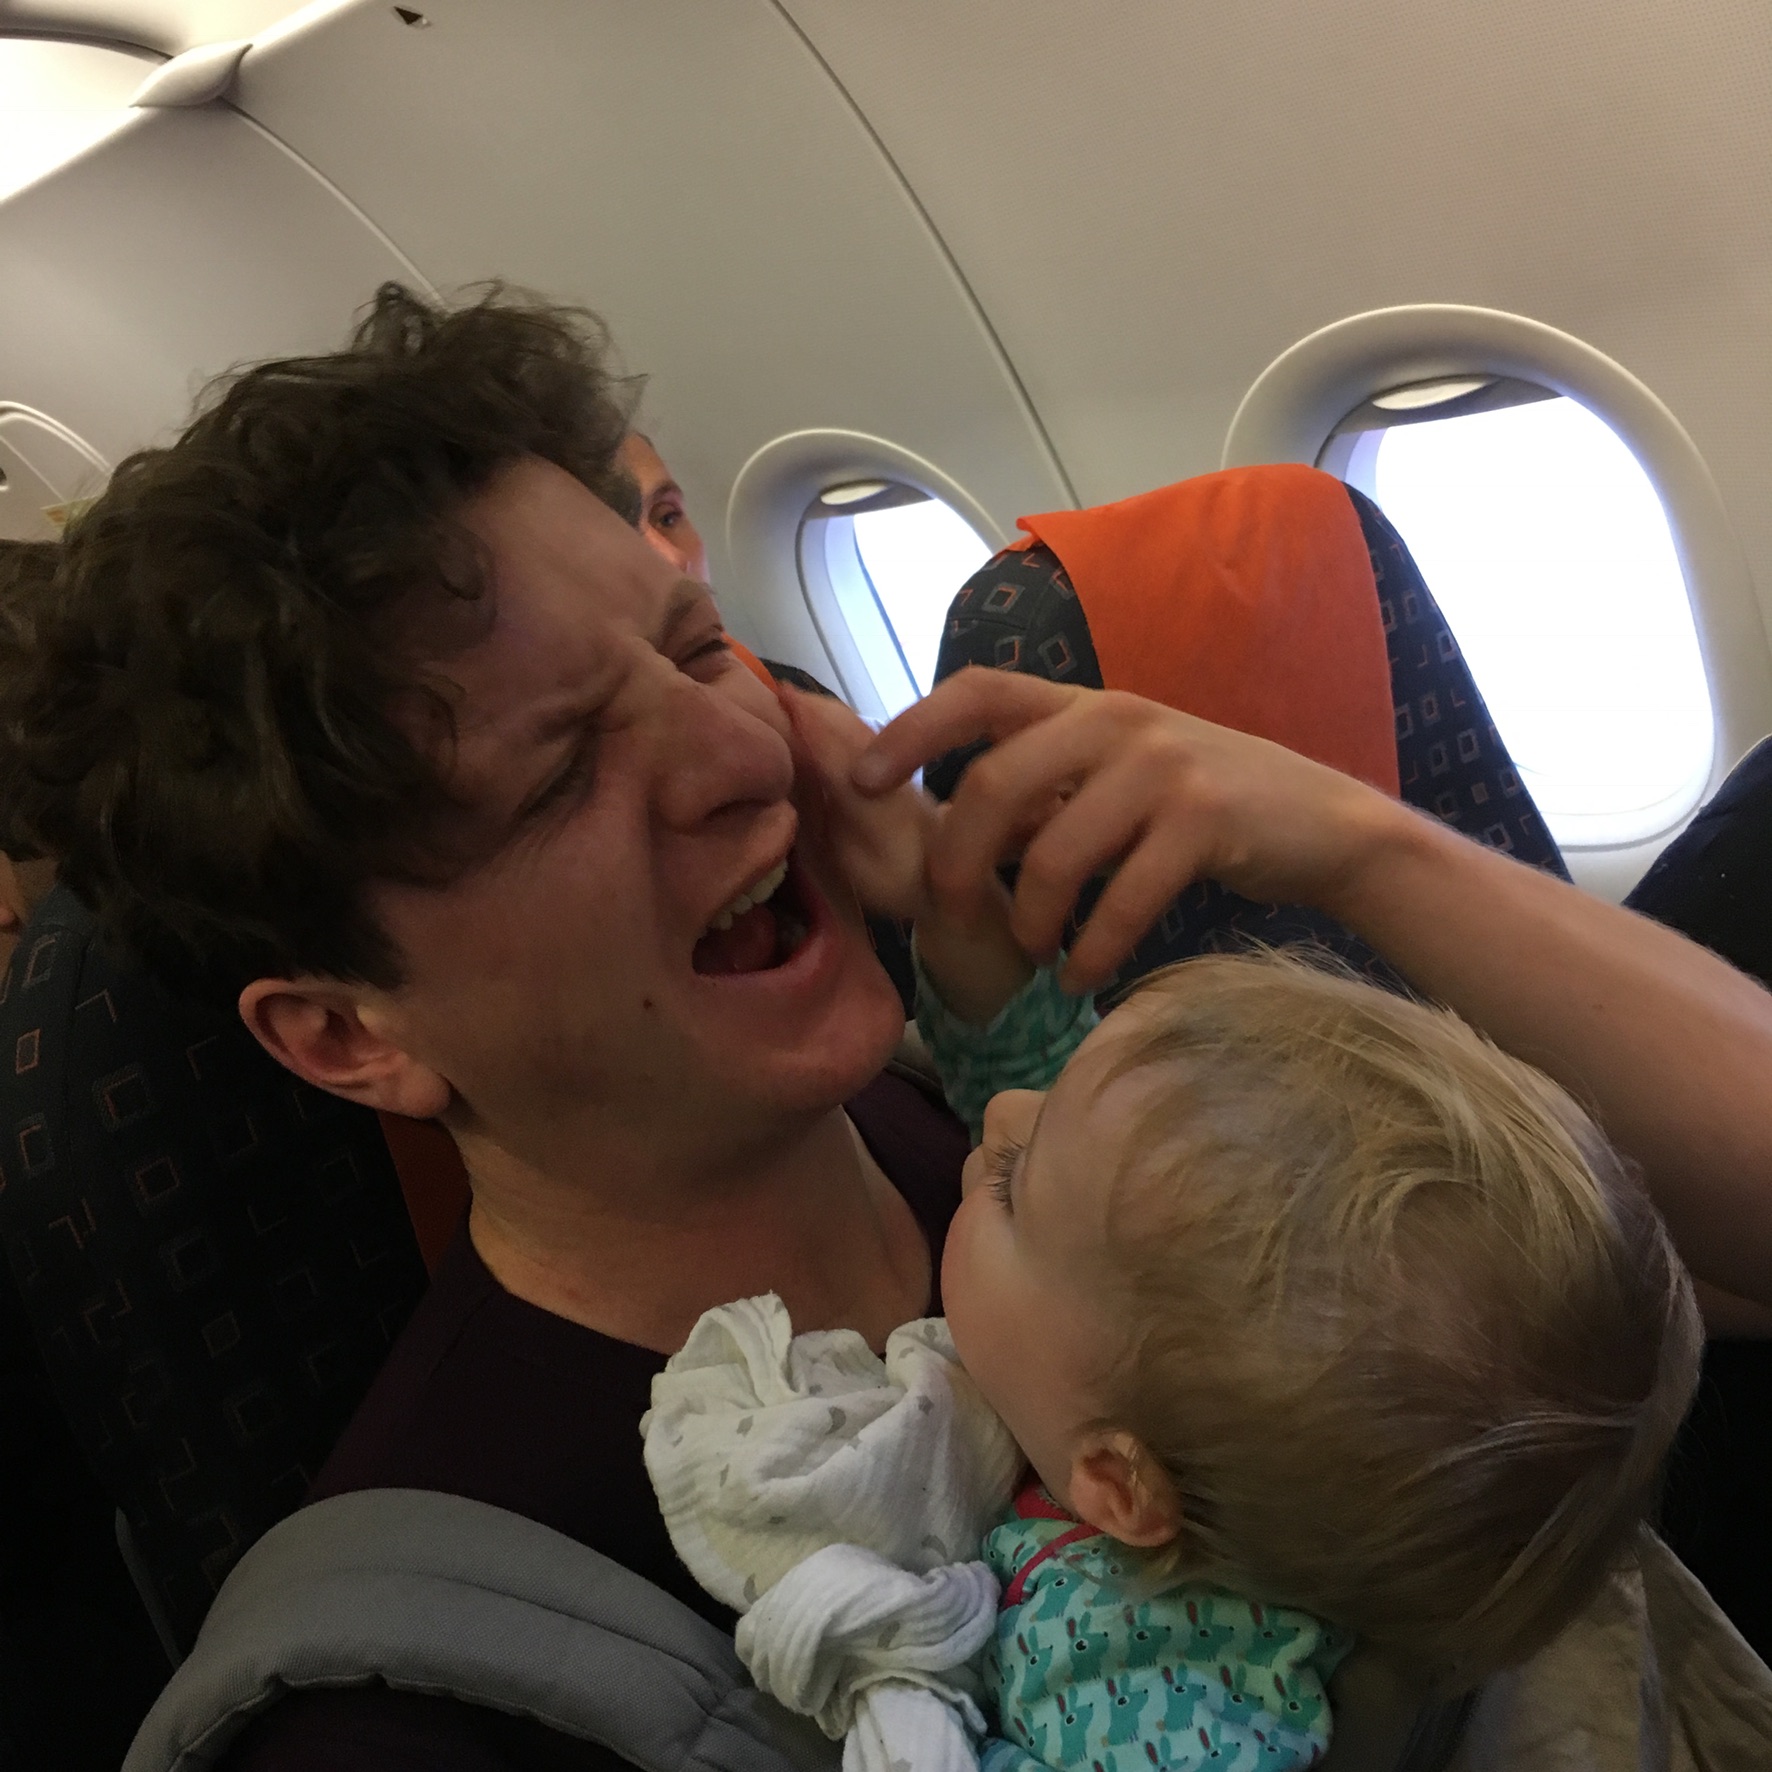 A baby grabs her father's face on a plane